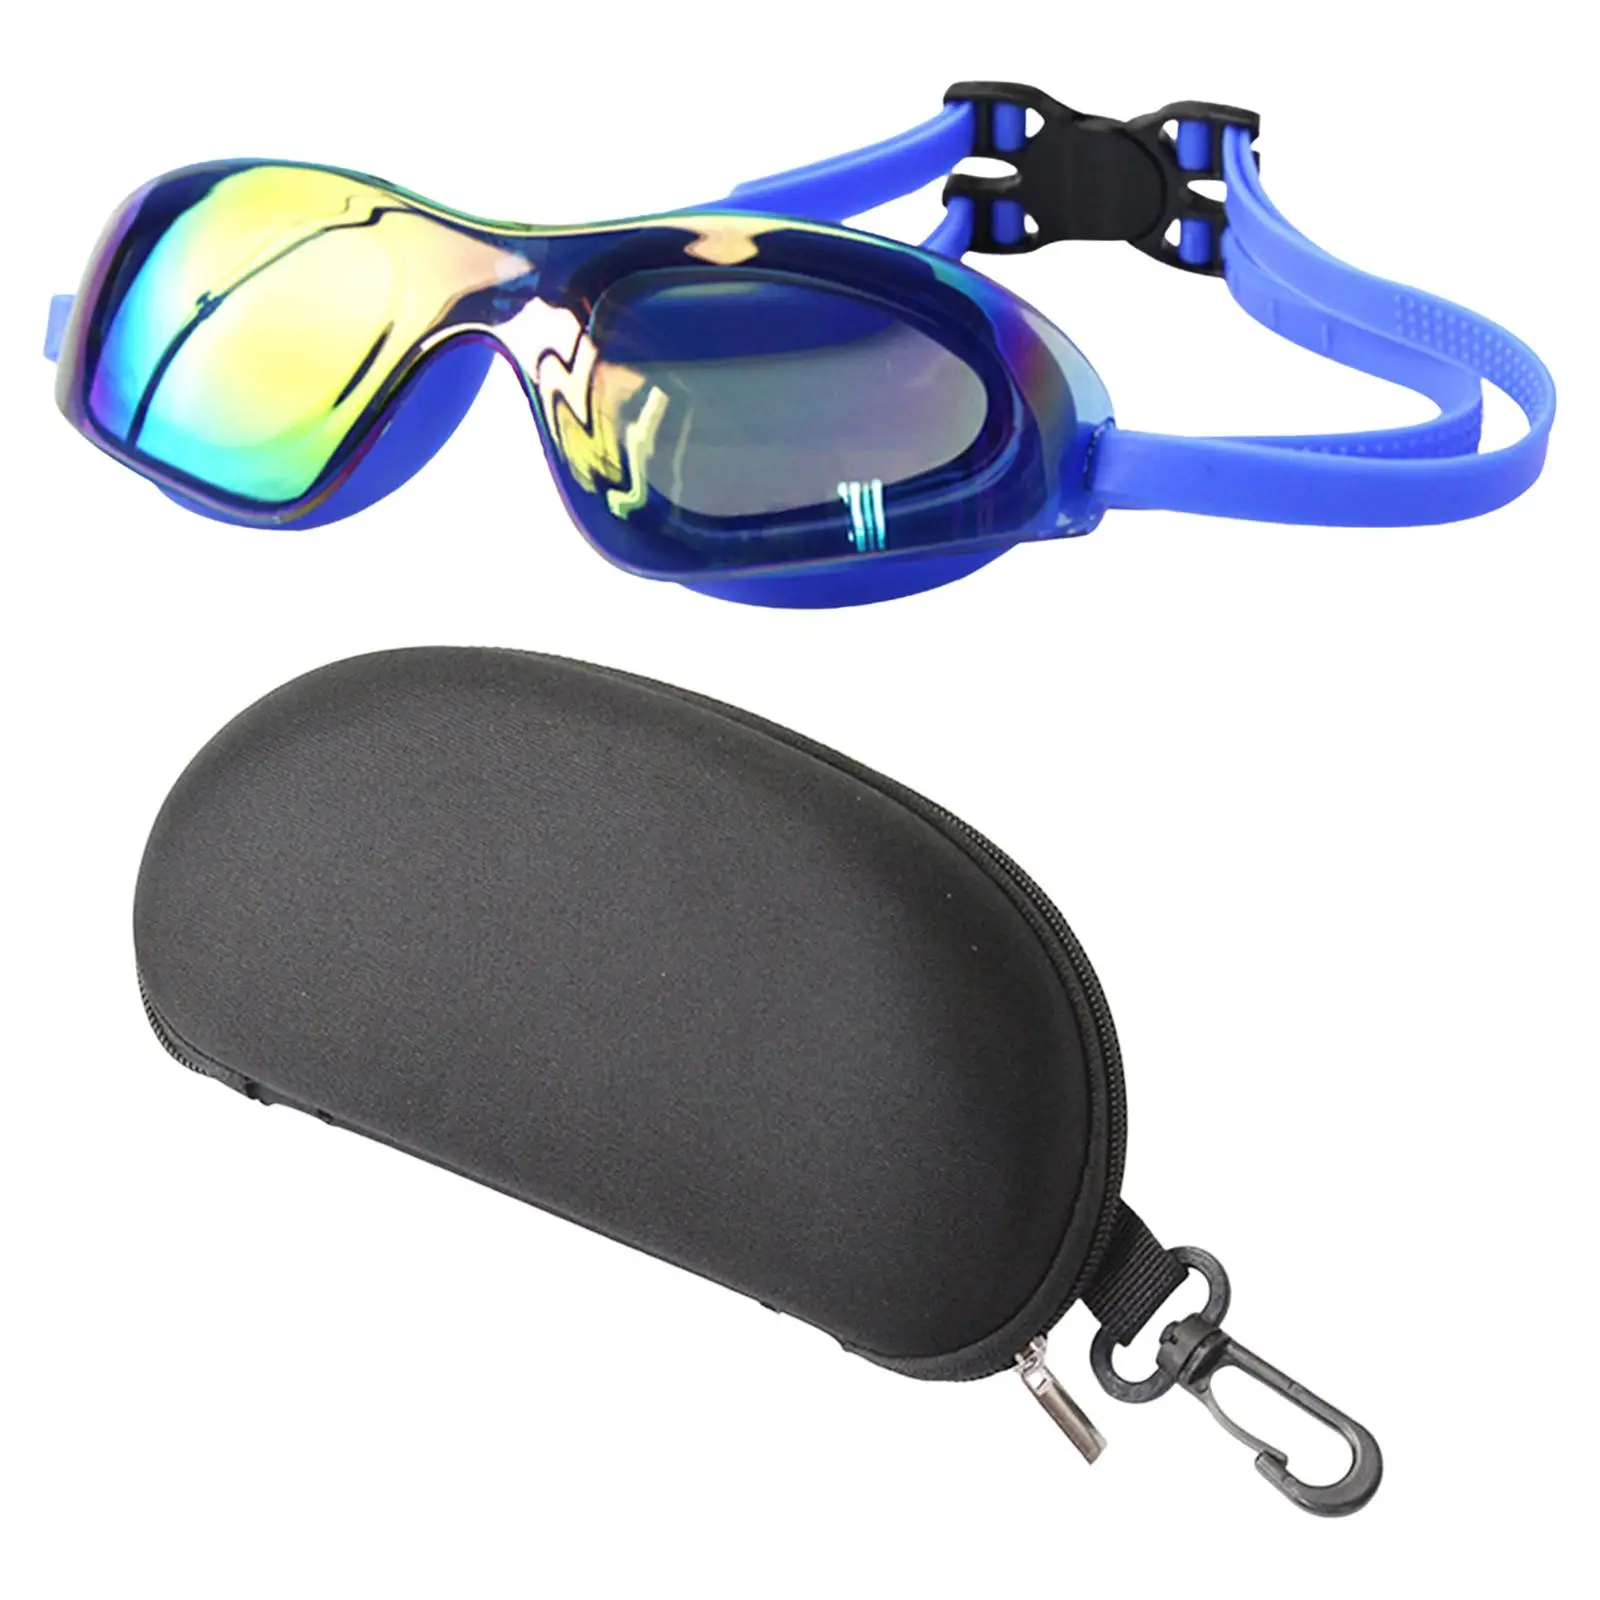 Swimming Glasses for Adults Men Women Water Resistant Adjustable Outdoor